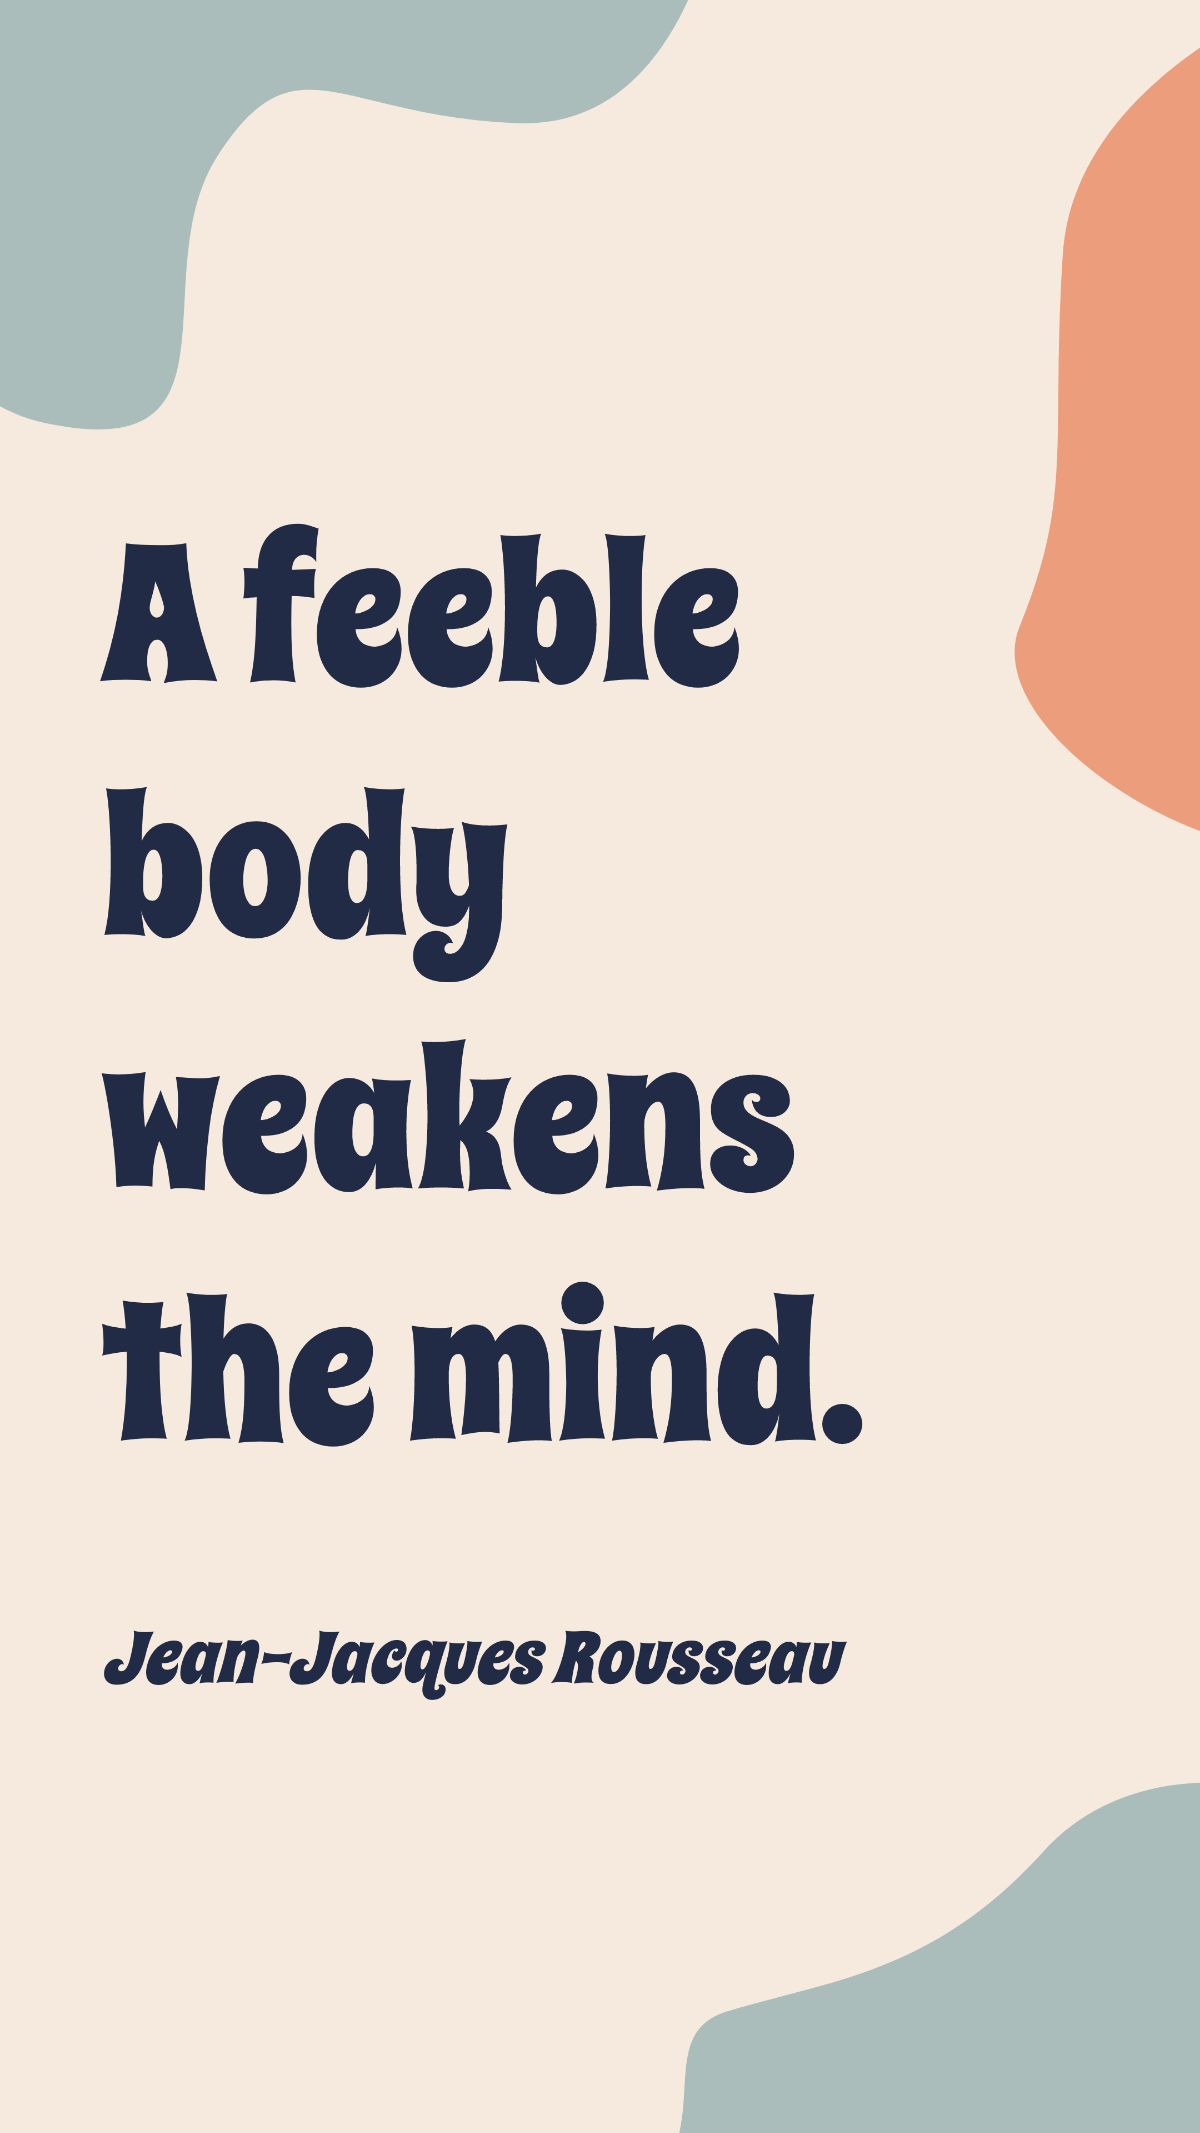 Free Jean-Jacques Rousseau - A feeble body weakens the mind. Template